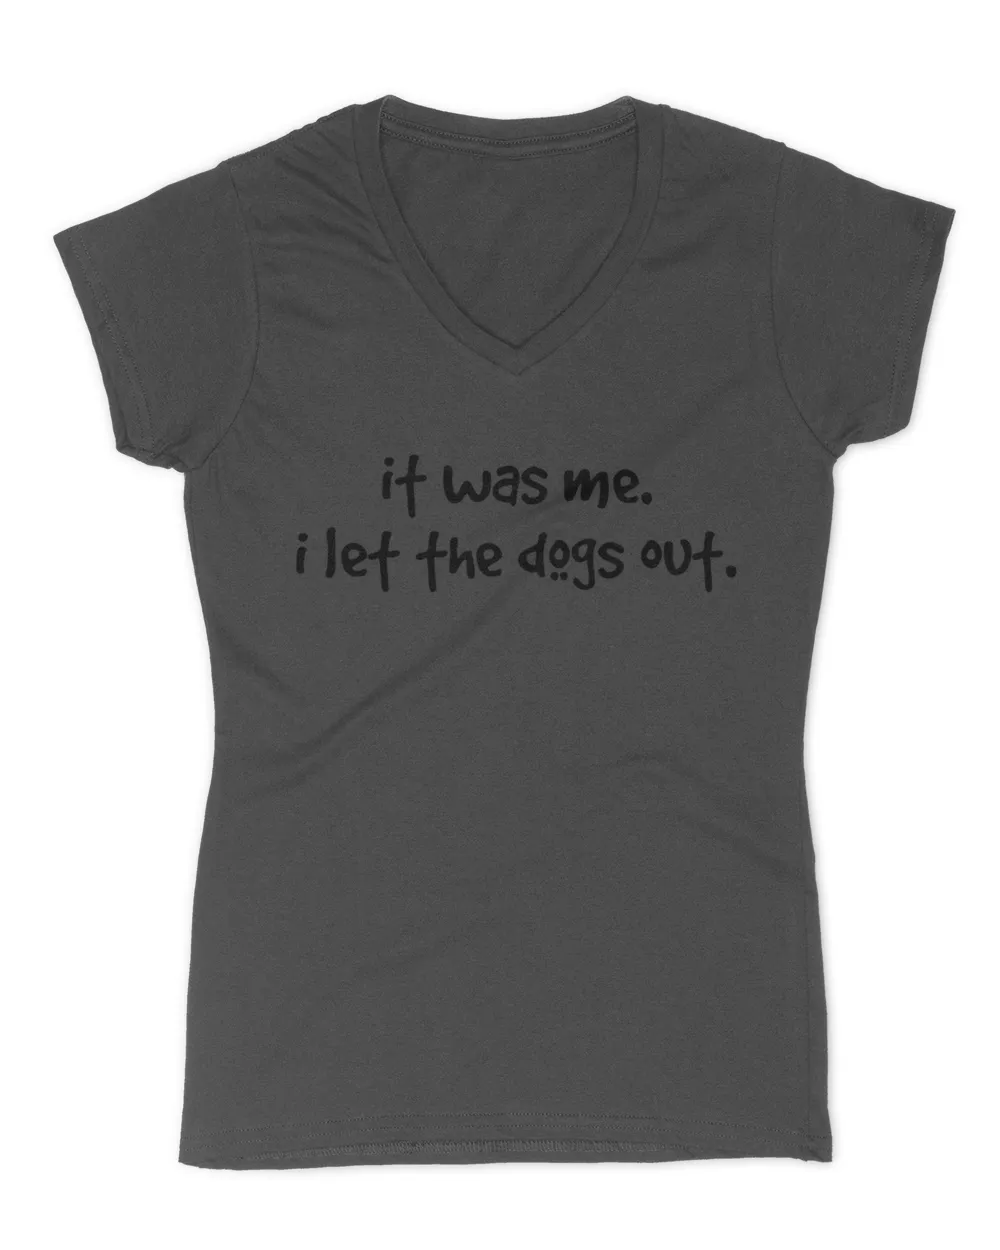 funny dog tee shirt, it was me i let the dogs out HOD030423A6